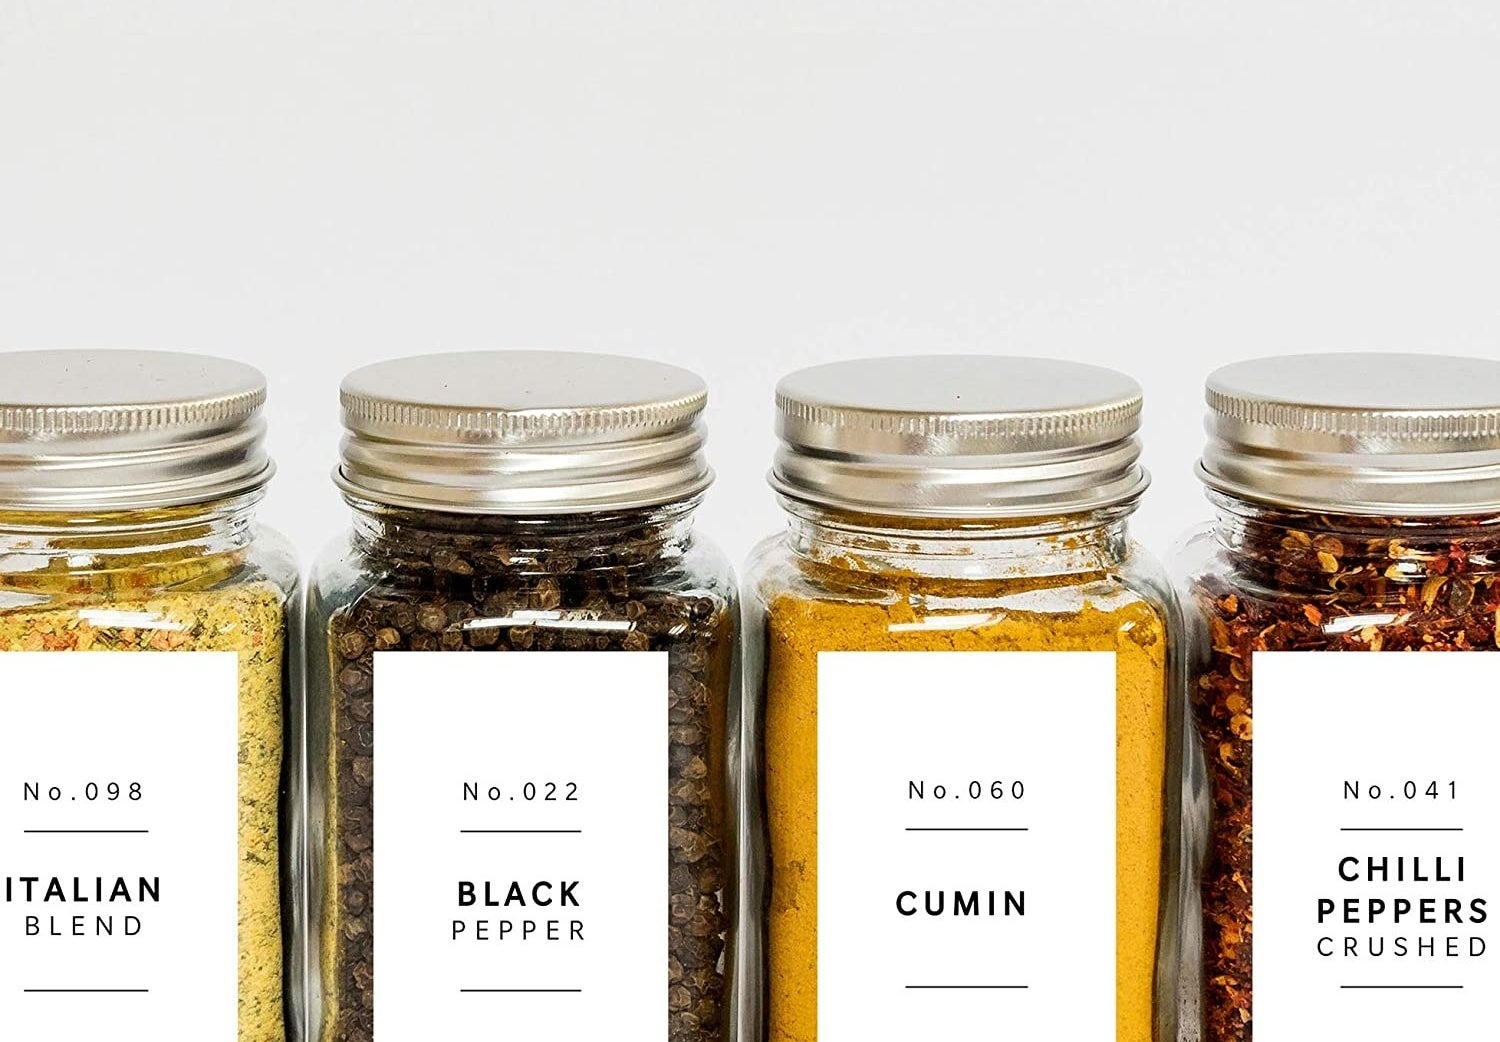 The labels on four jars of spices